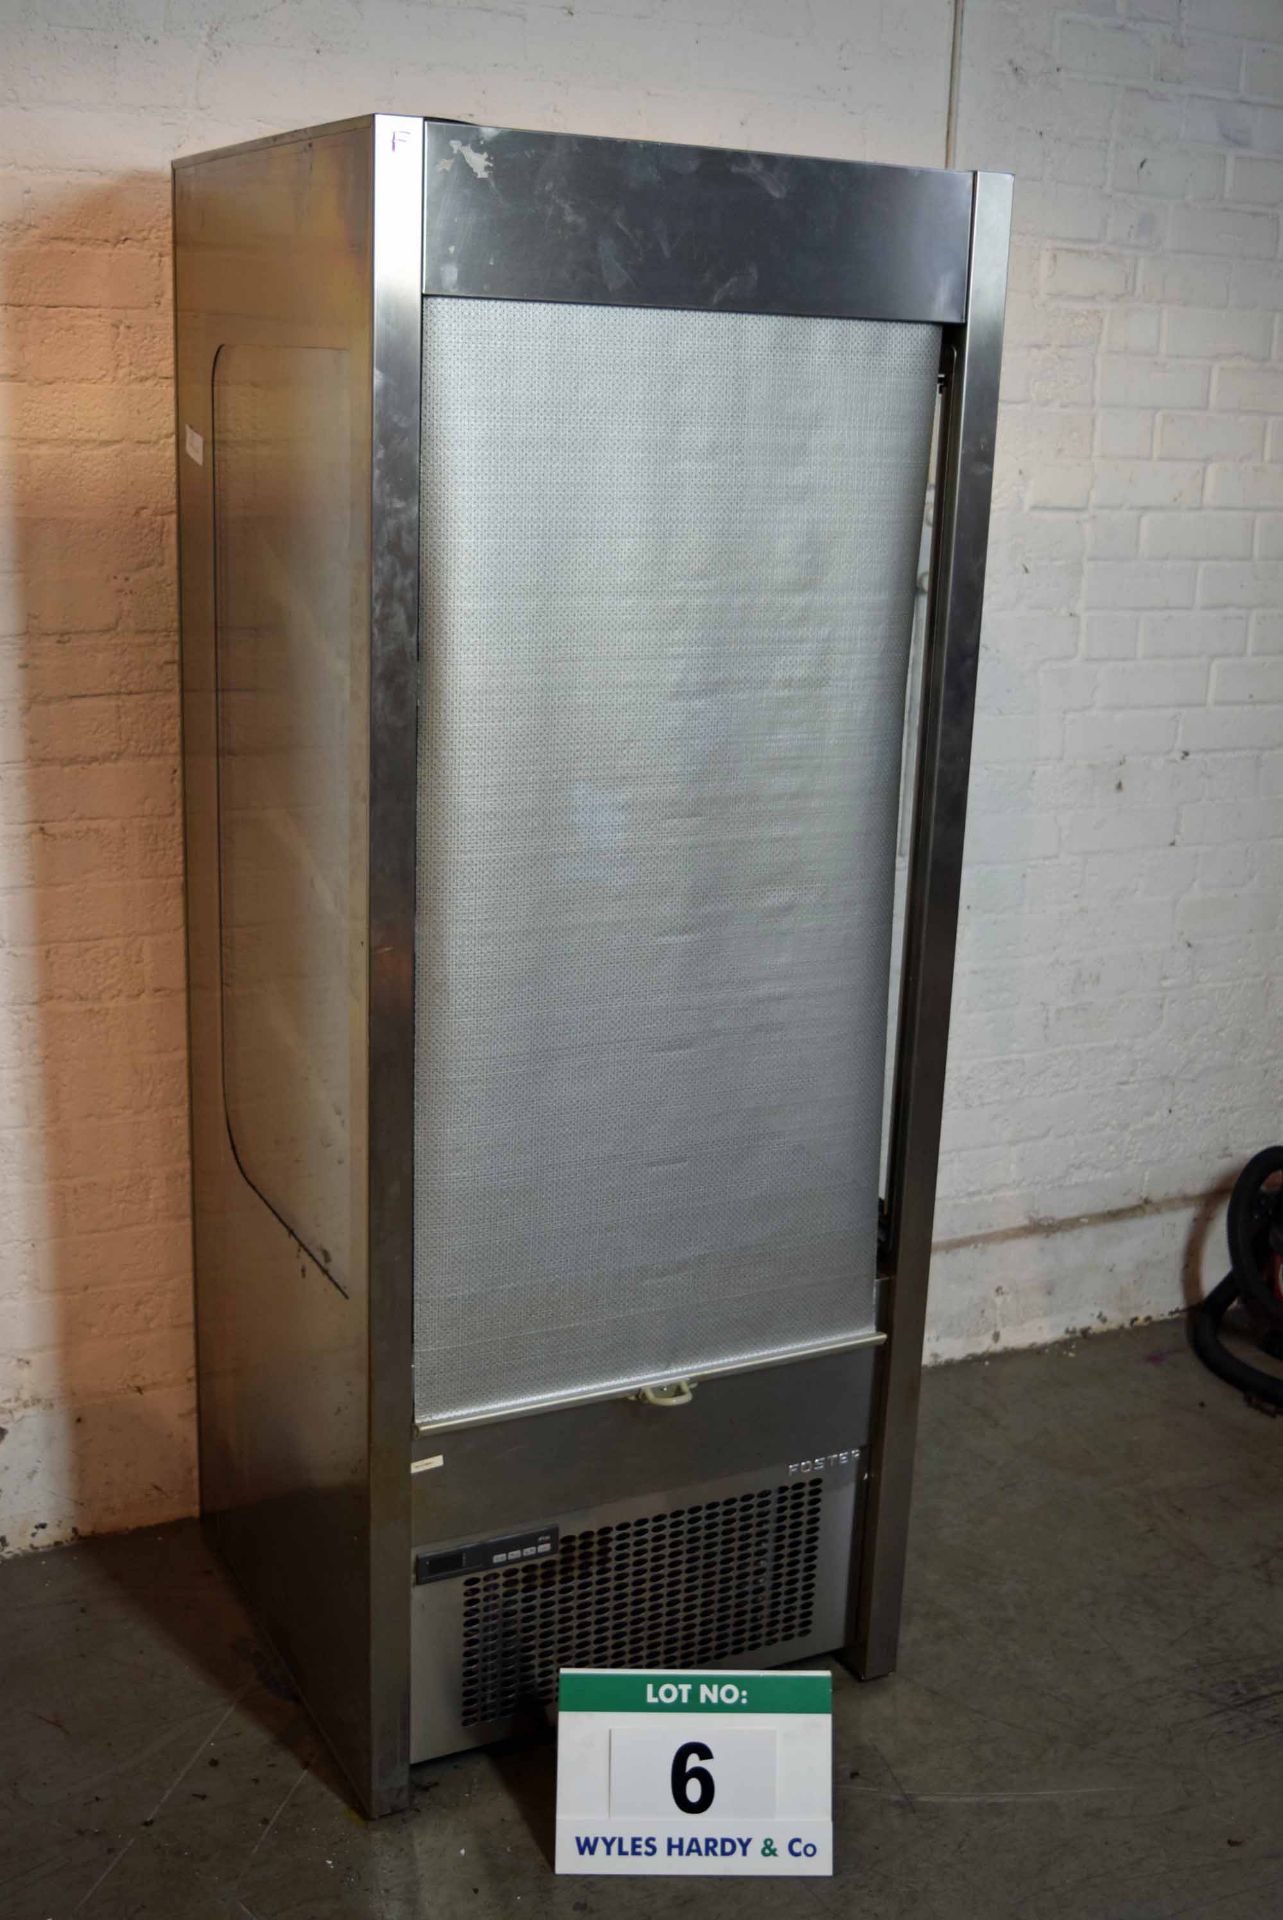 A FOSTER FMSLIM 700NG Stainless Steel Slimline Multi-0Deck Chiller Cabinet with Three Adjustable - Image 2 of 2